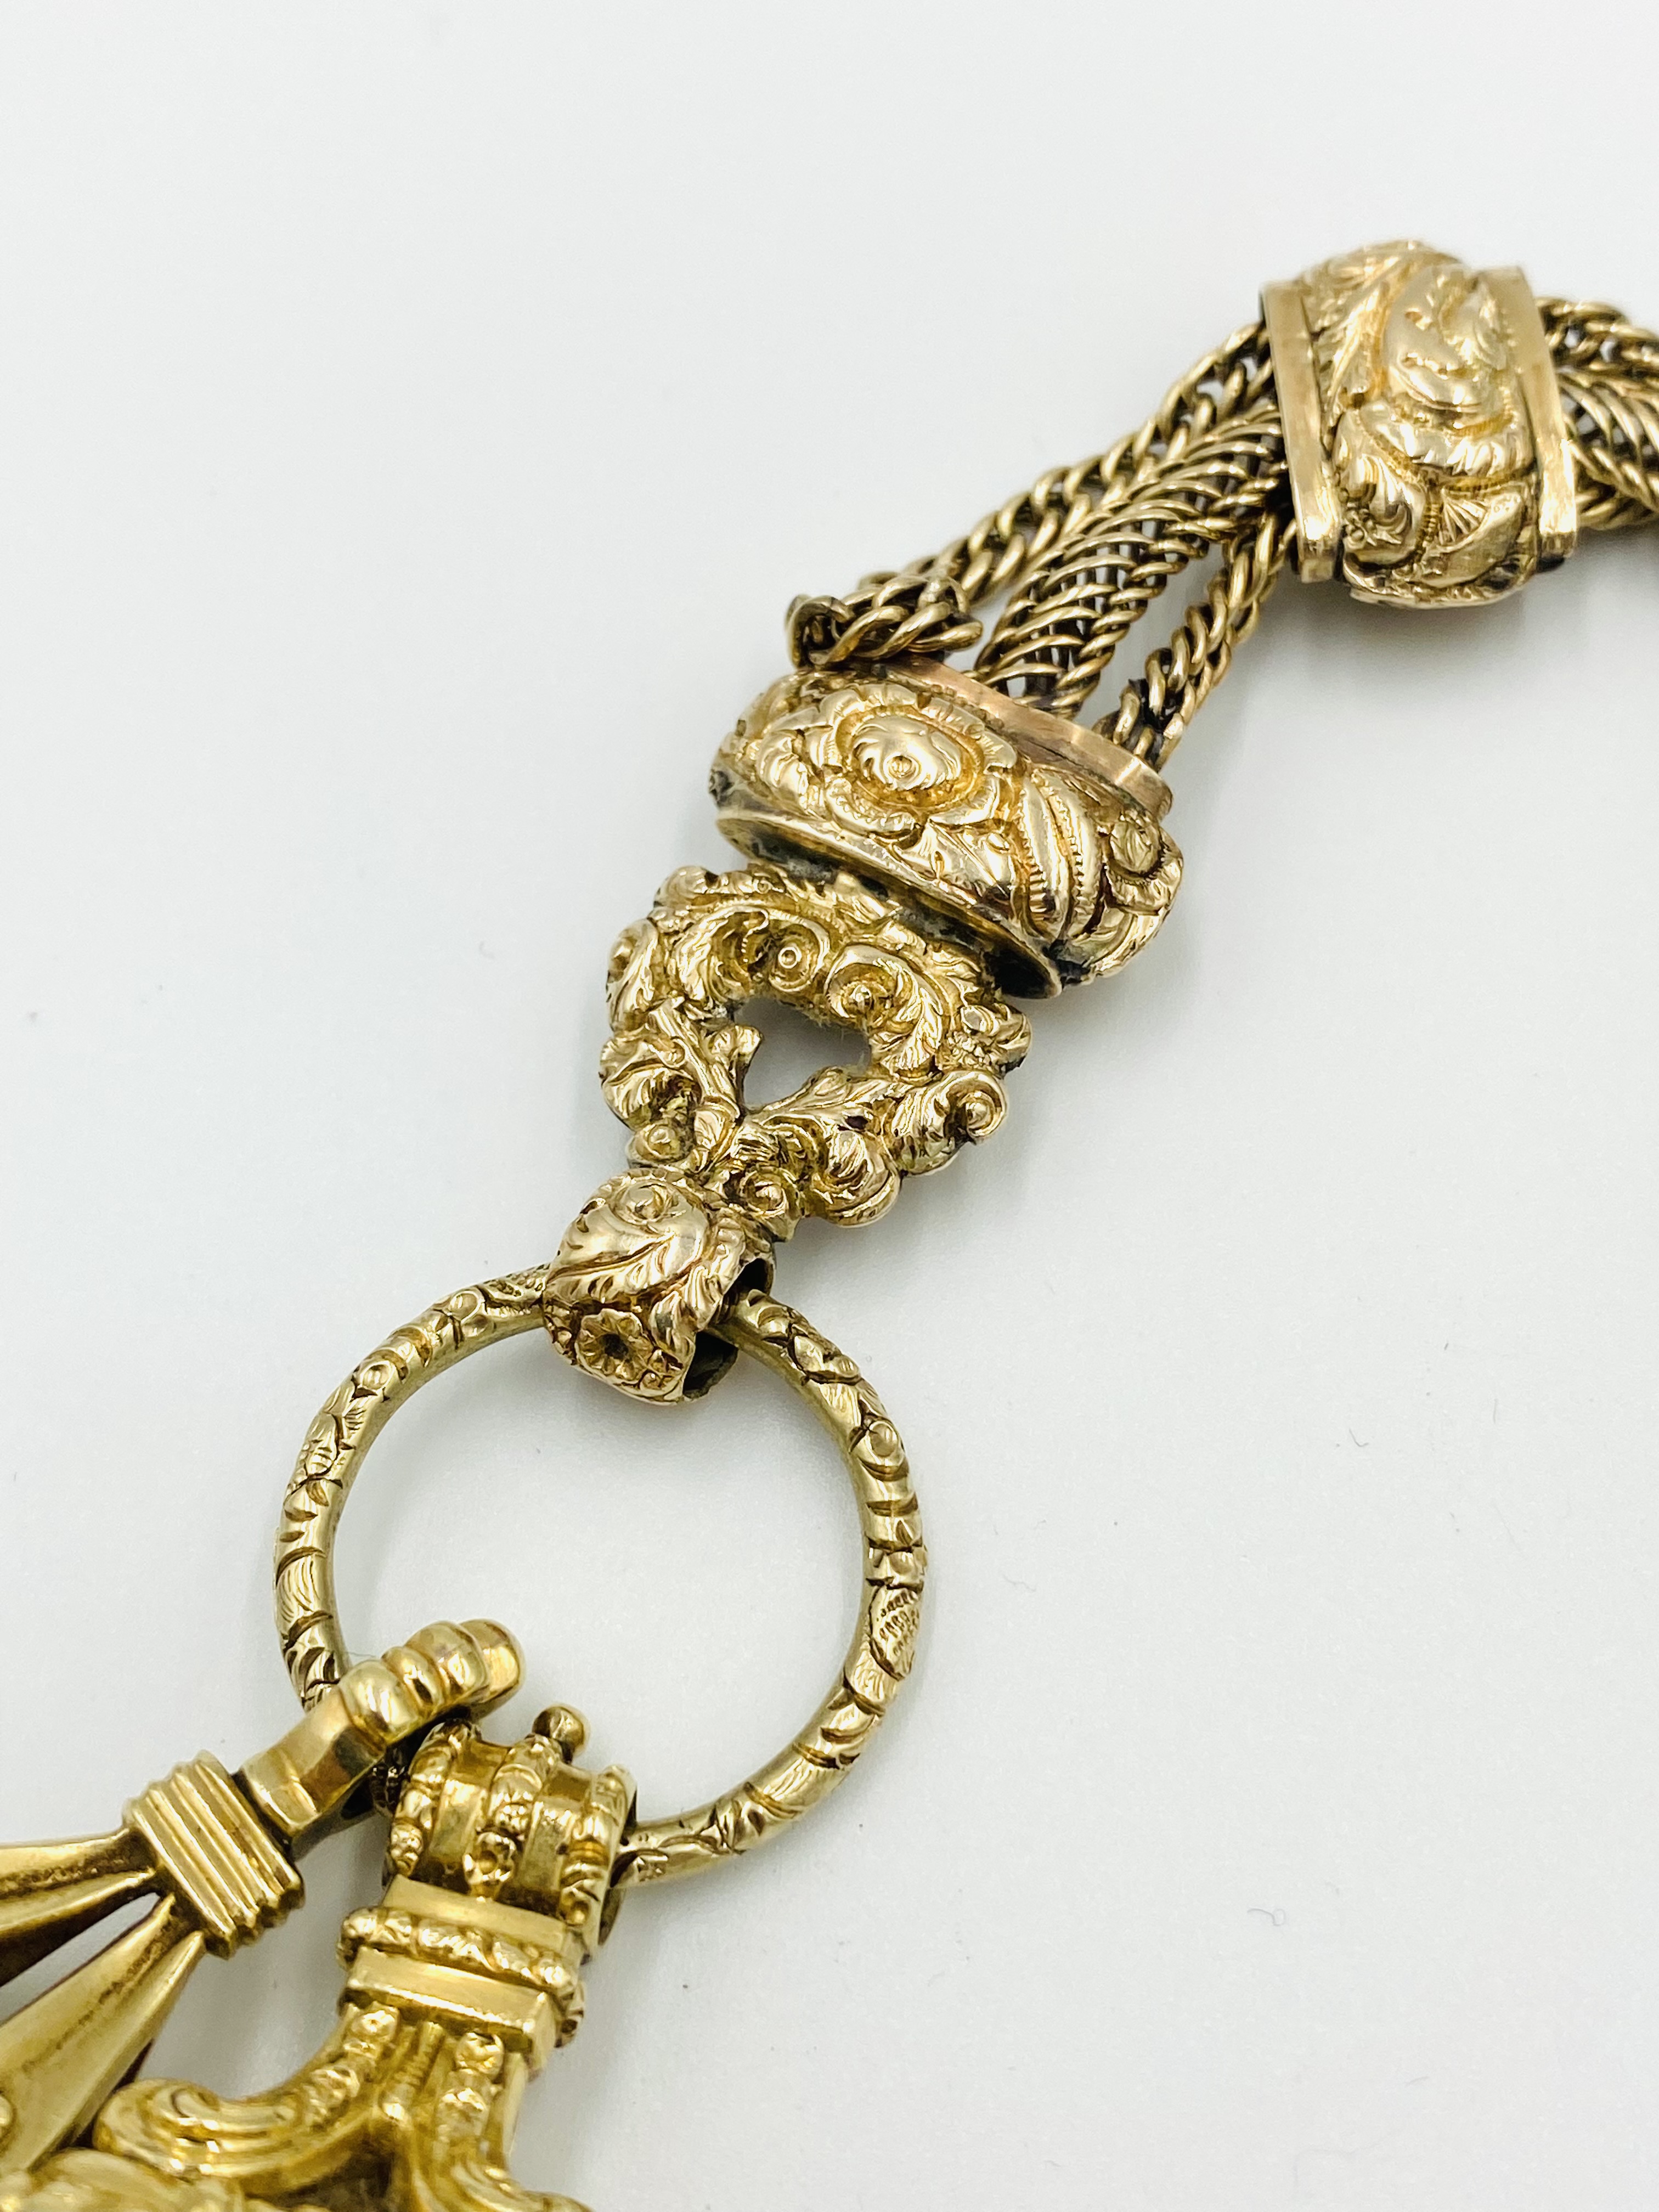 Gold fob chain with two seals - Image 5 of 8